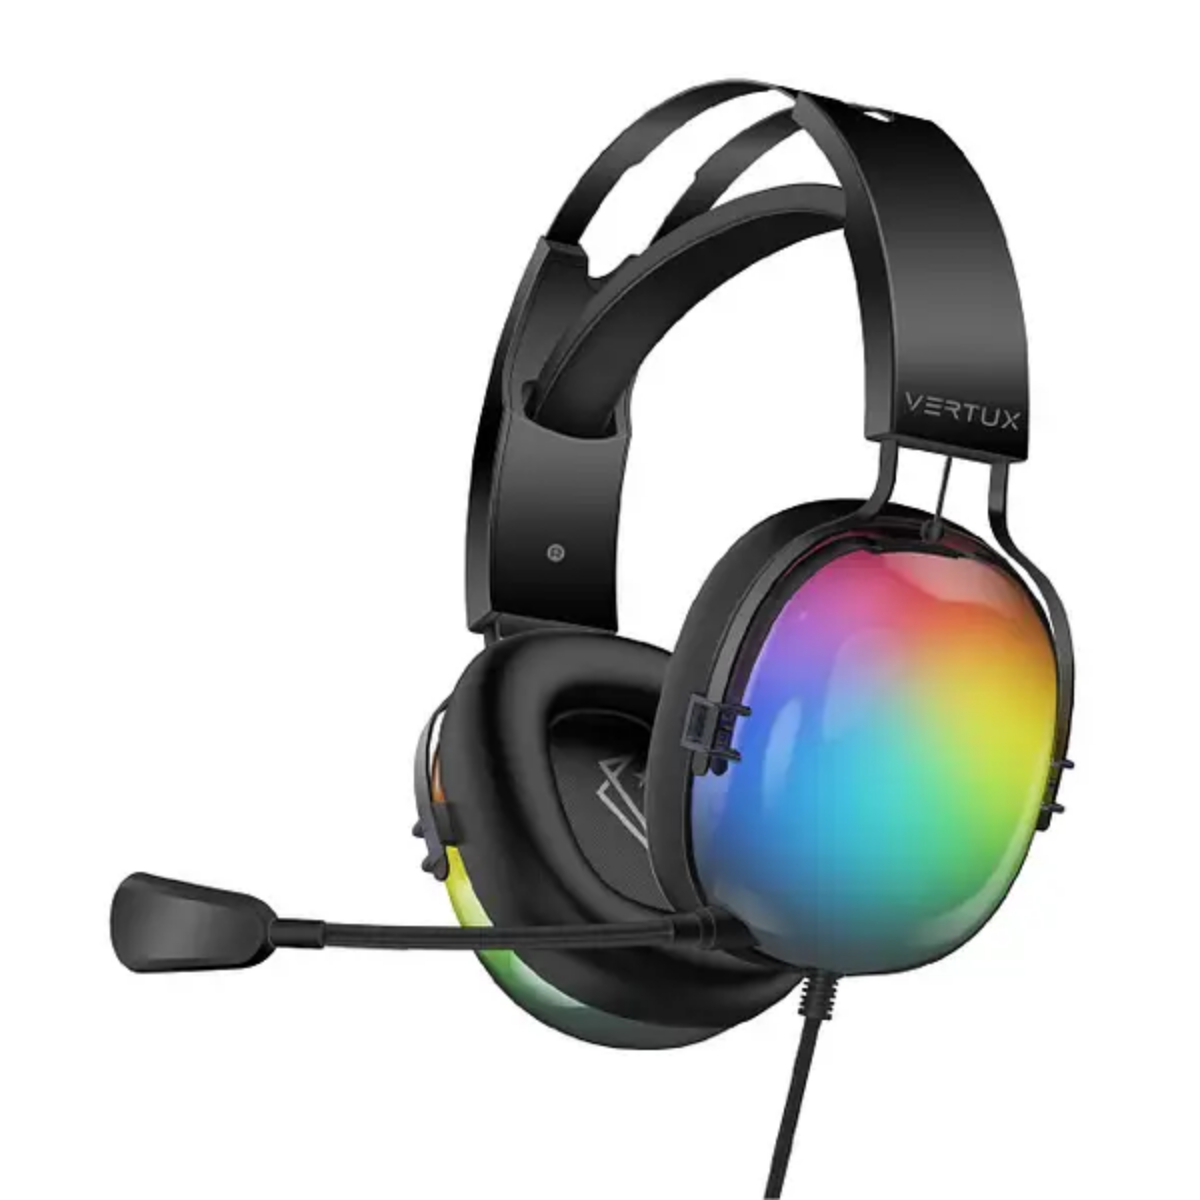 VERTUX SIRIUS – HIGH PERFORMANCE 7.1 STEREO SOUND GAMING LUMIFLUX™ HEADSET WITH MICROPHONE